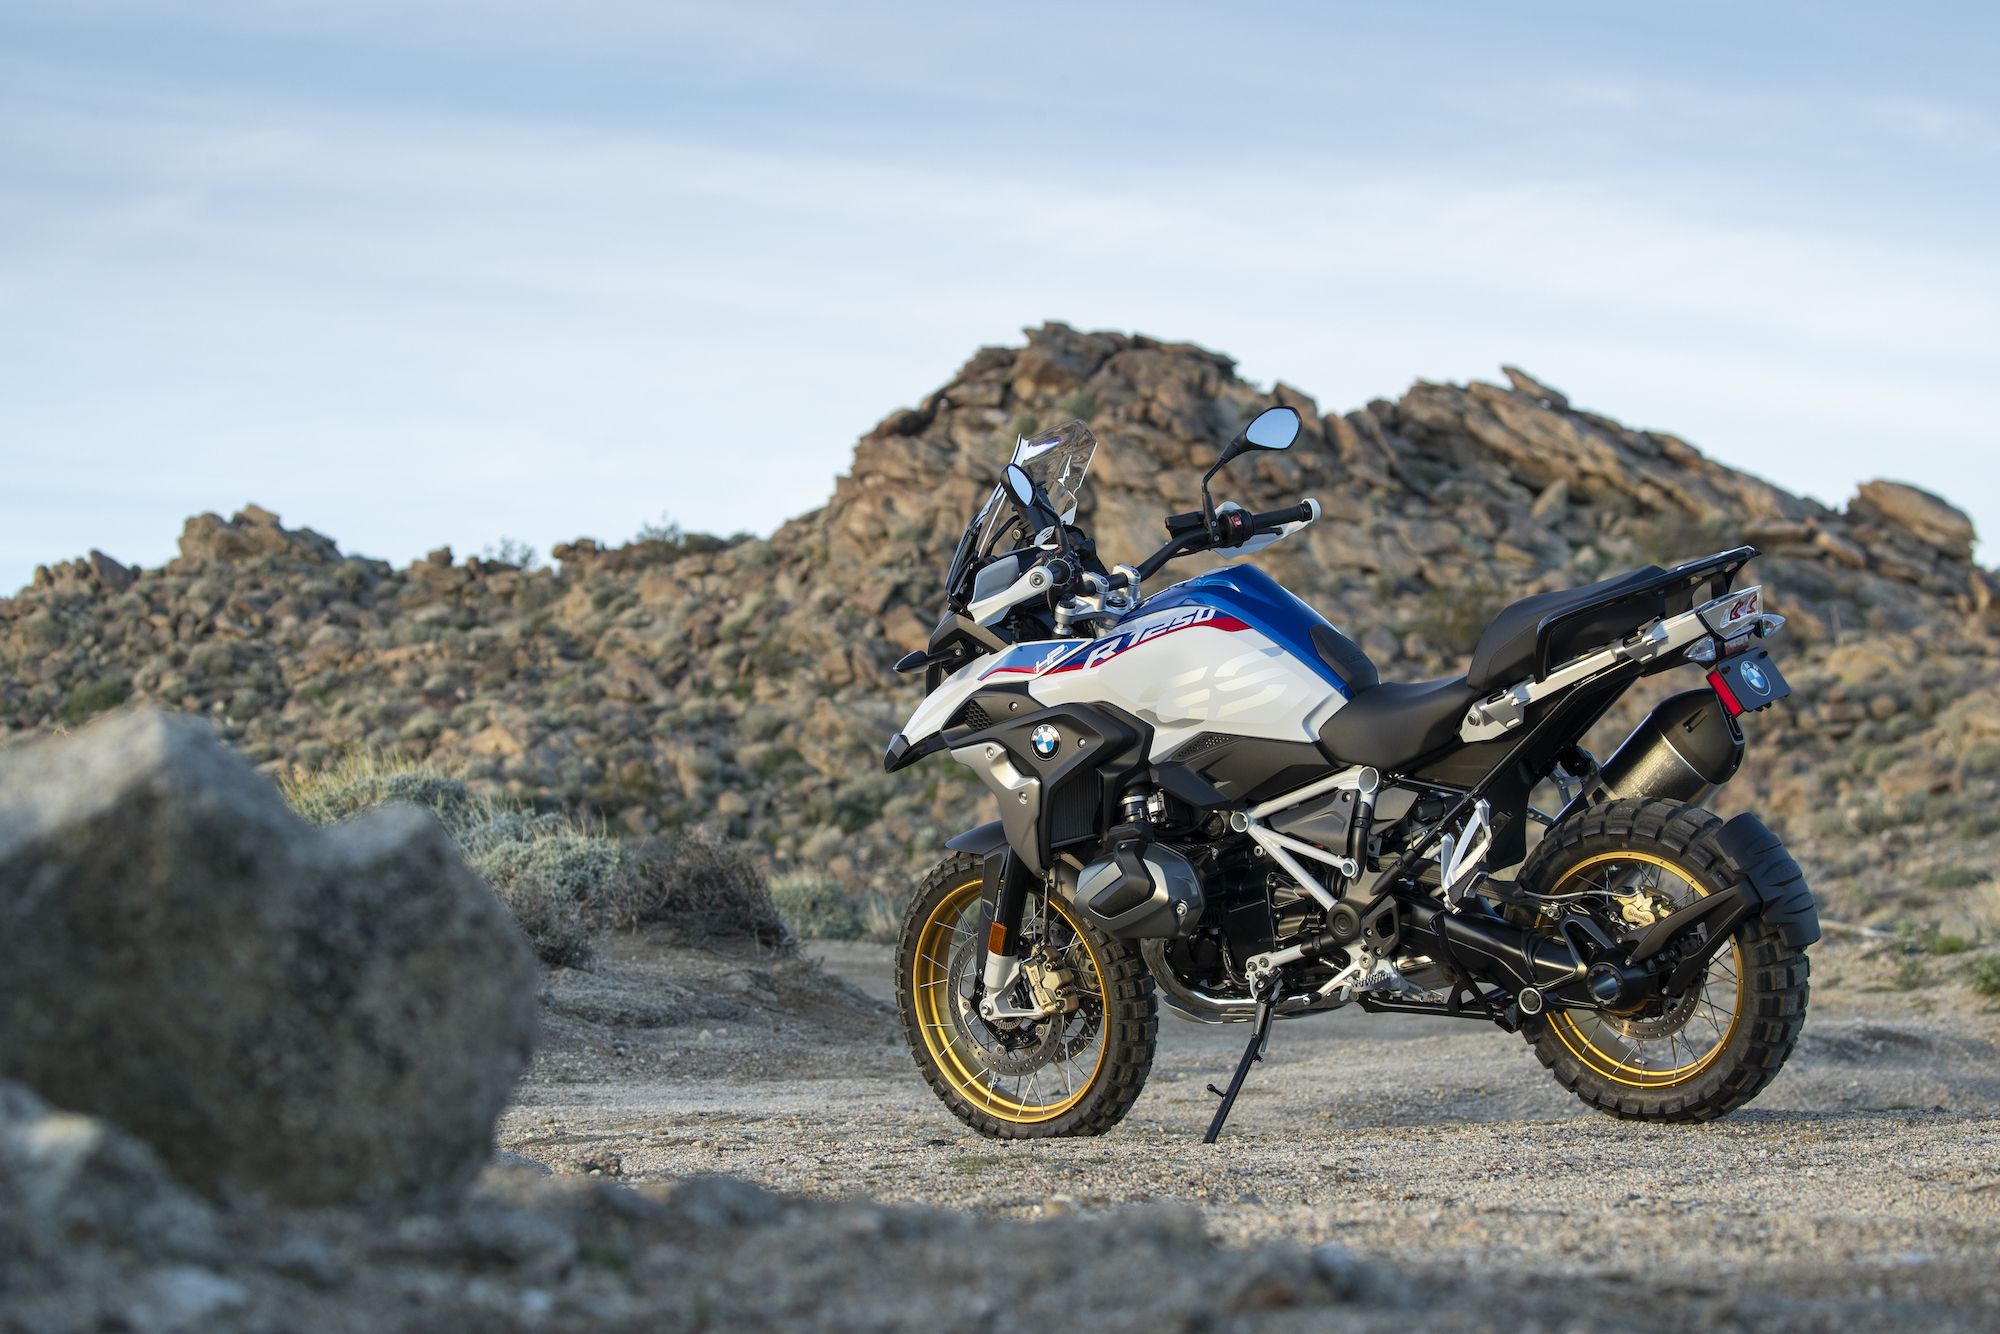 4 things I learned riding the BMW R 1250 GS